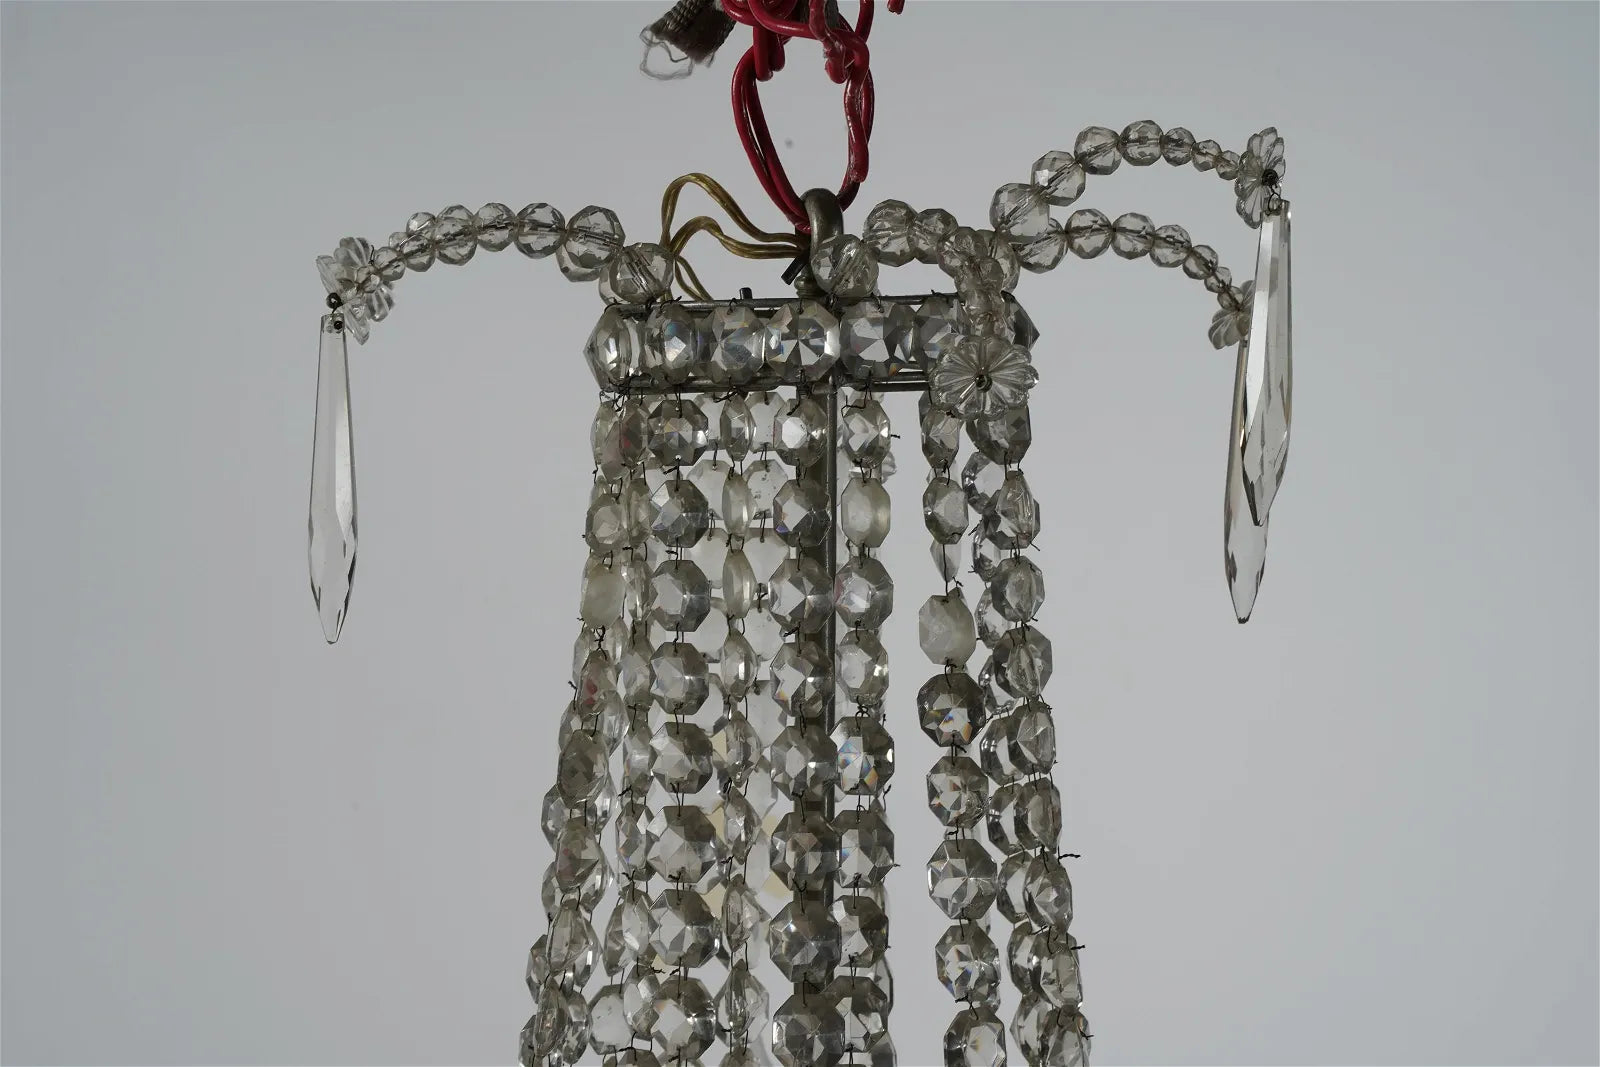 AL1-063: MID 19TH CENTURY FRENCH EMPIRE SIX LIGHT CRYSTAL CHANDELIER